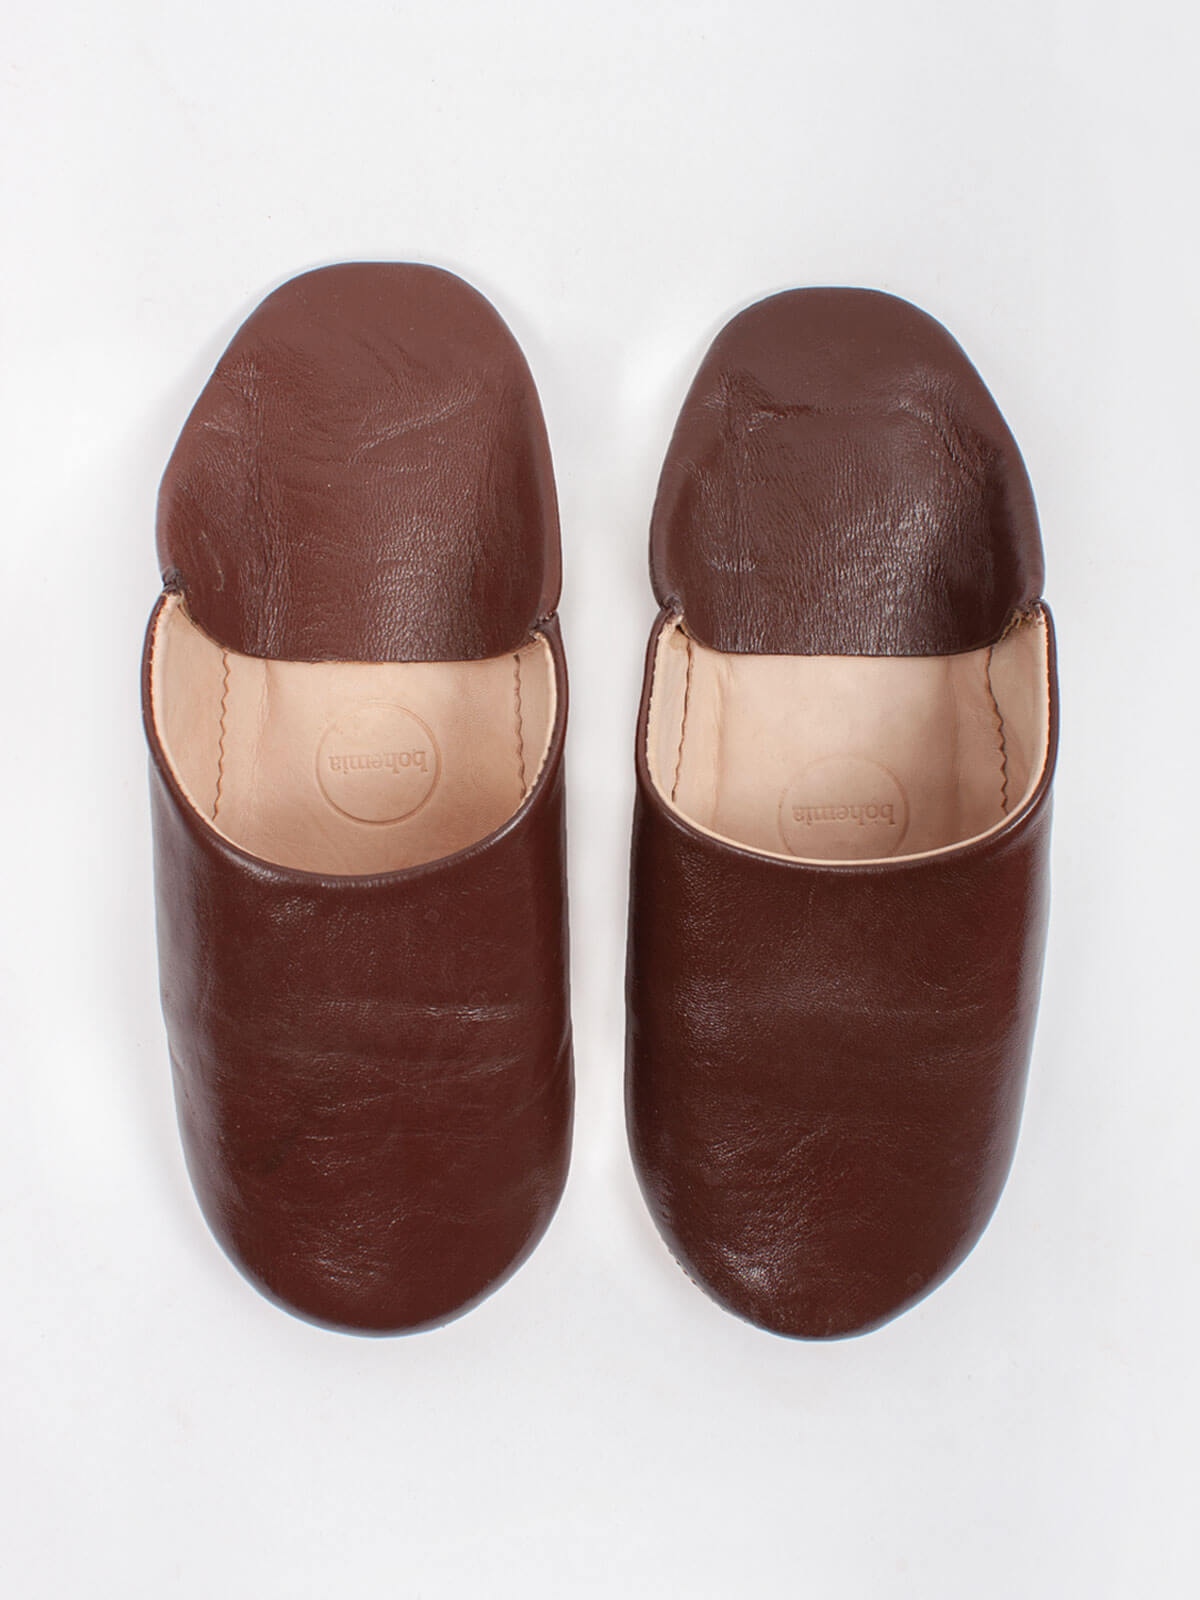 Moroccan Mens Babouche Slippers, Chocolate